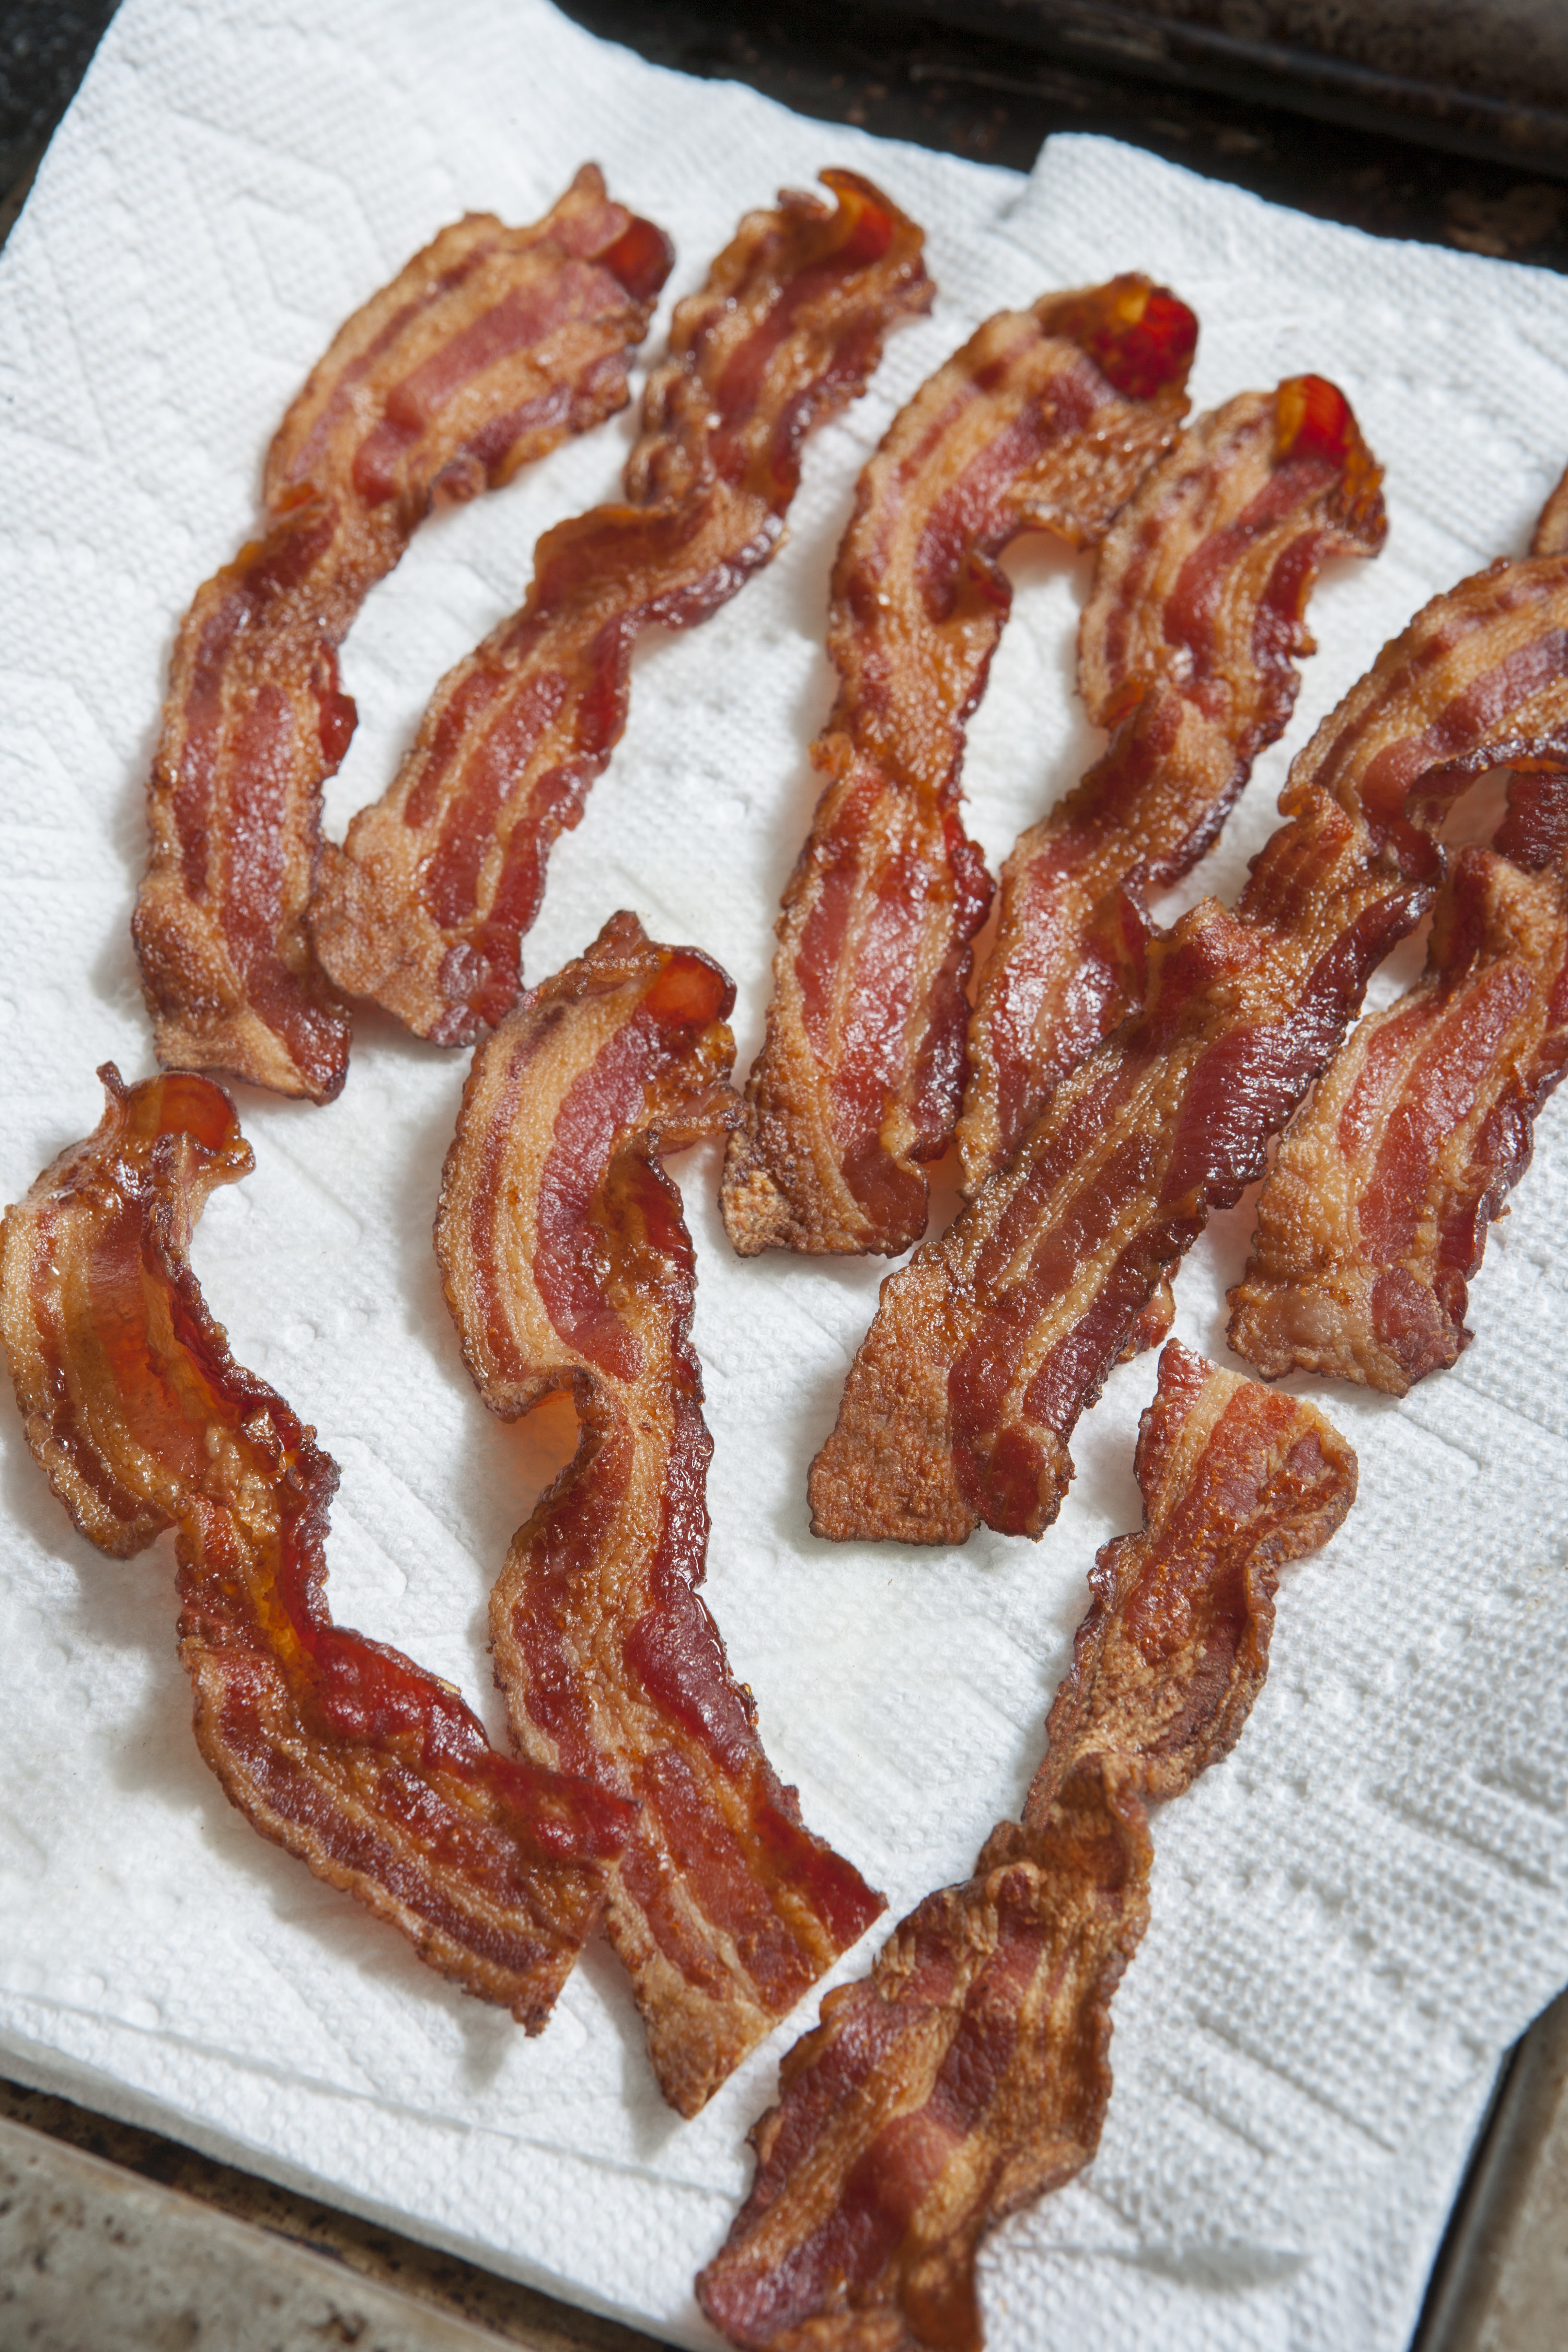 Paper towel covered with strips of cooked crispy bacon